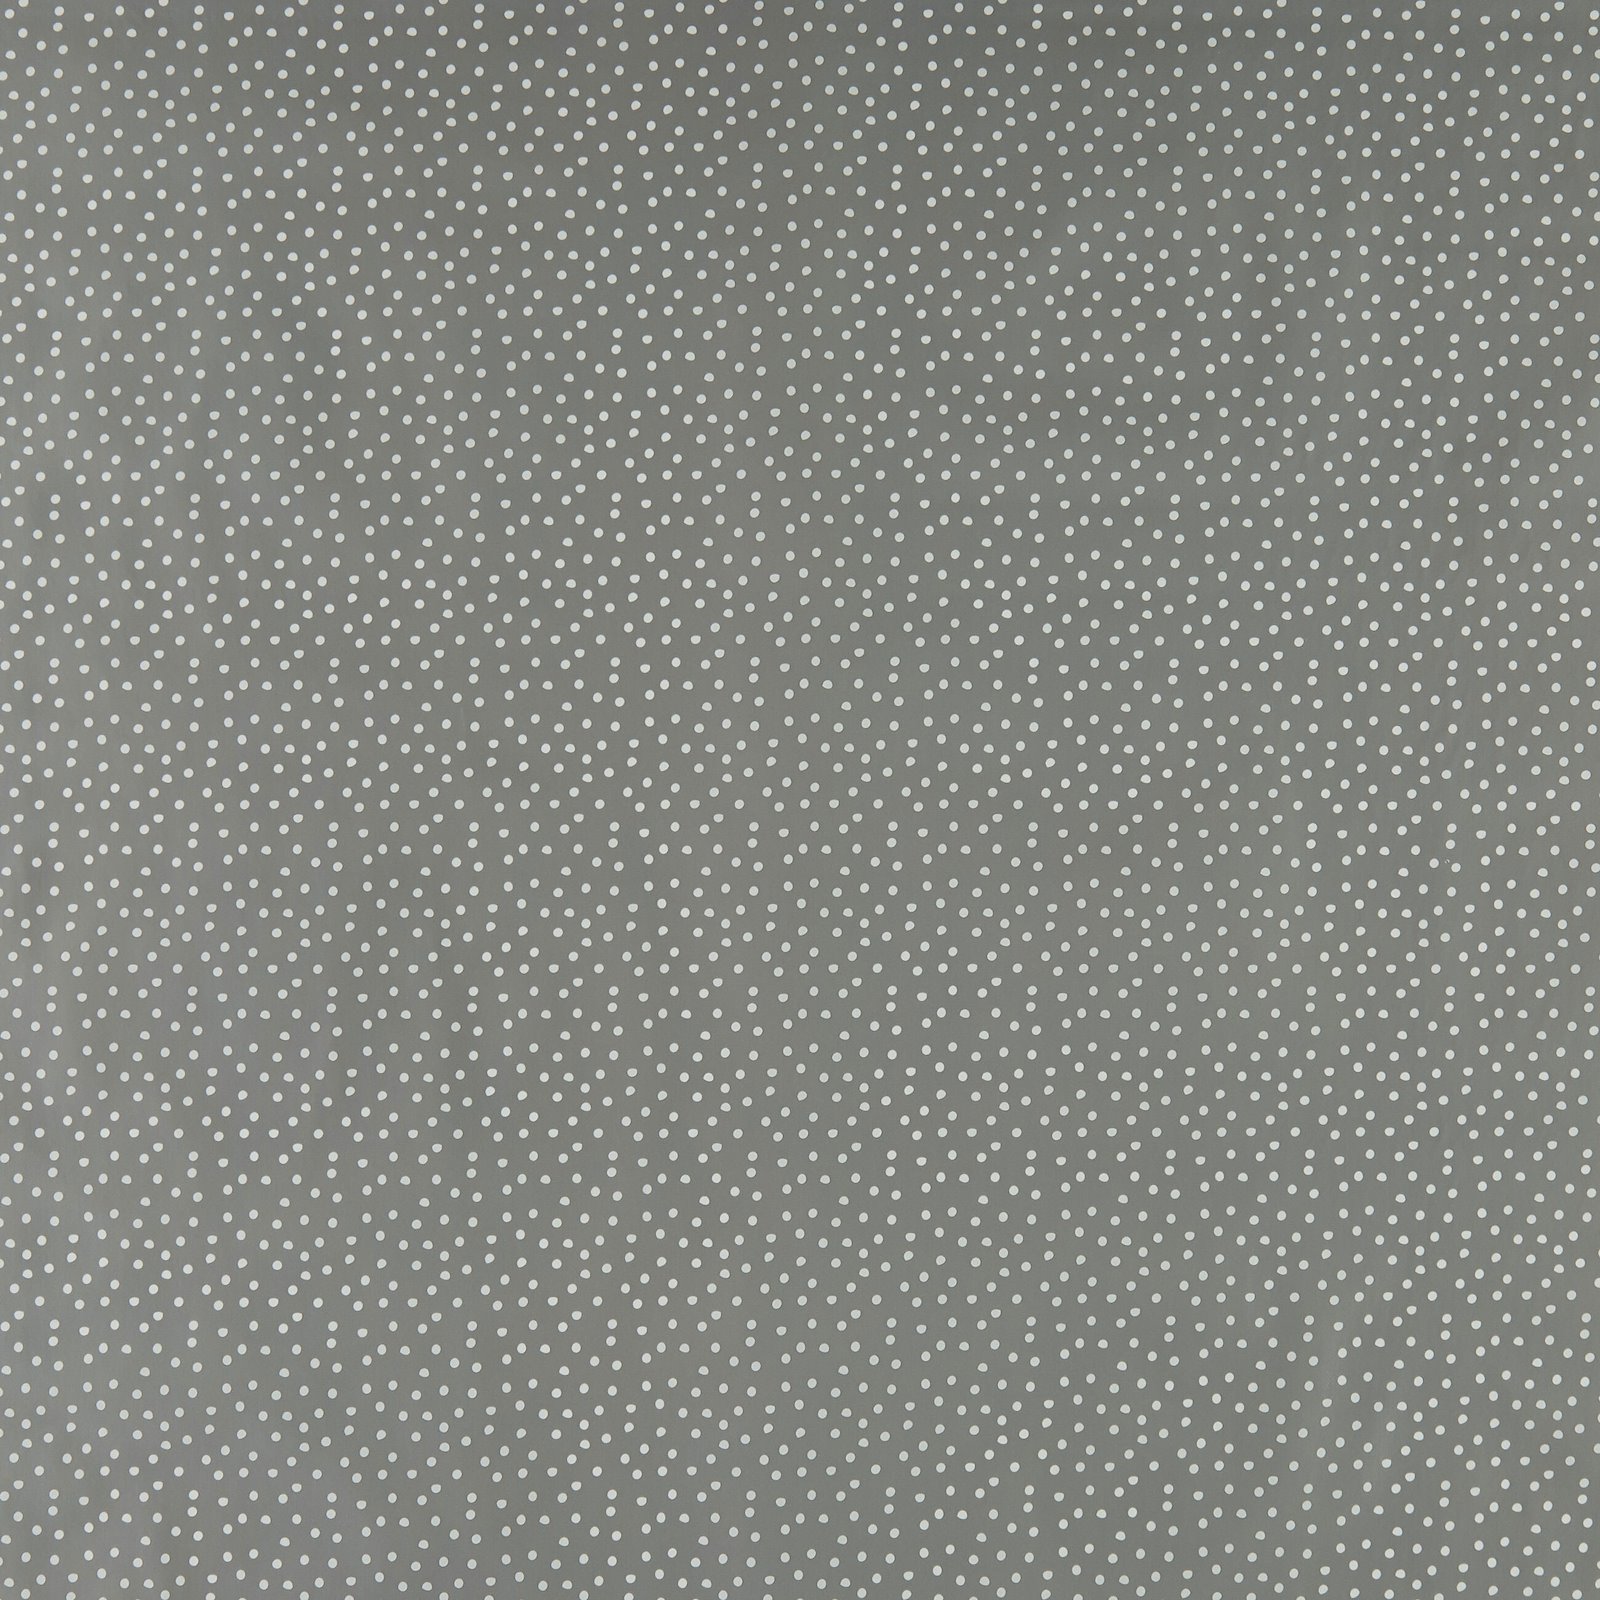 Non-woven oilcloth lt grey w white dots 866151_pack_sp